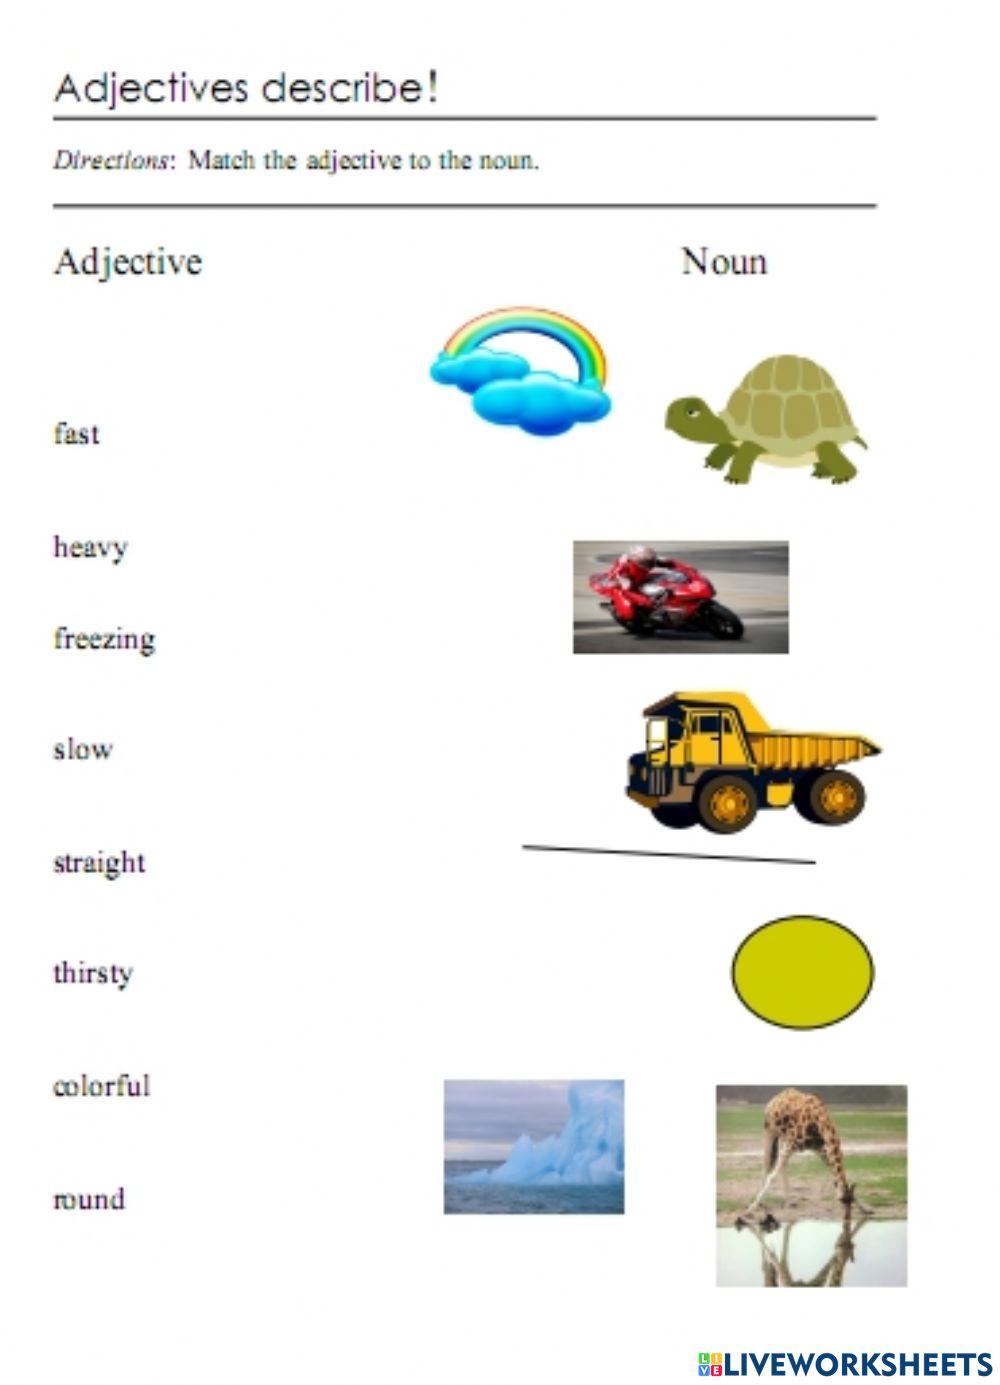 Adjectives (Join adjectives with nouns)